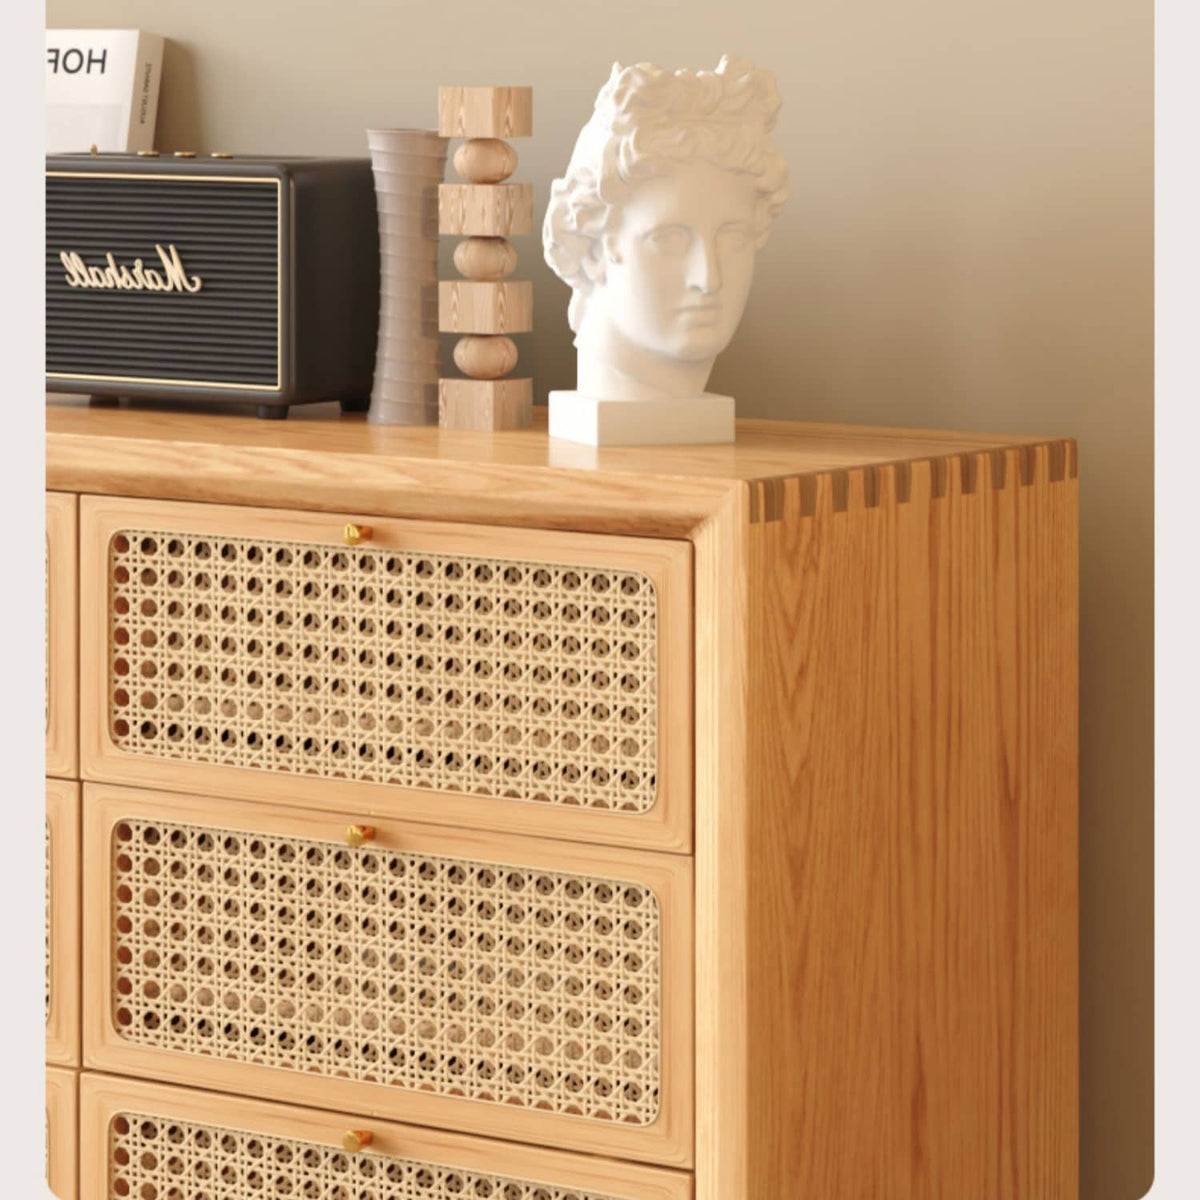 Stylish Oak Wood Cabinet with Rattan Accents and Metal Detailing hbzwg-648